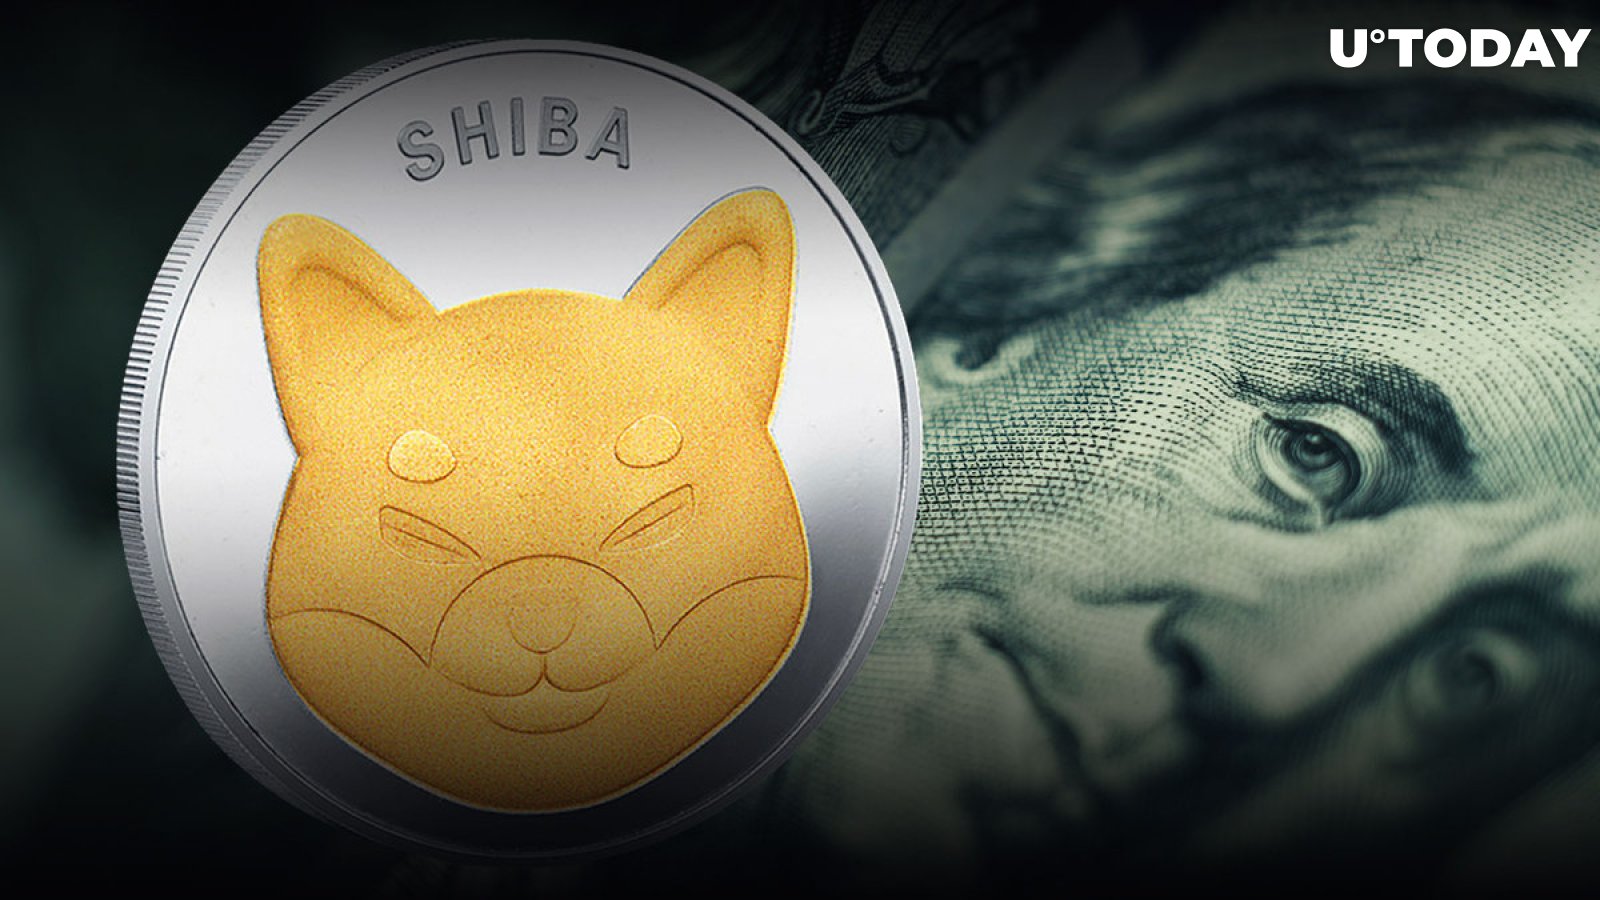 More Millionaire Shiba Inu Owners Are Emerging, Data Shows